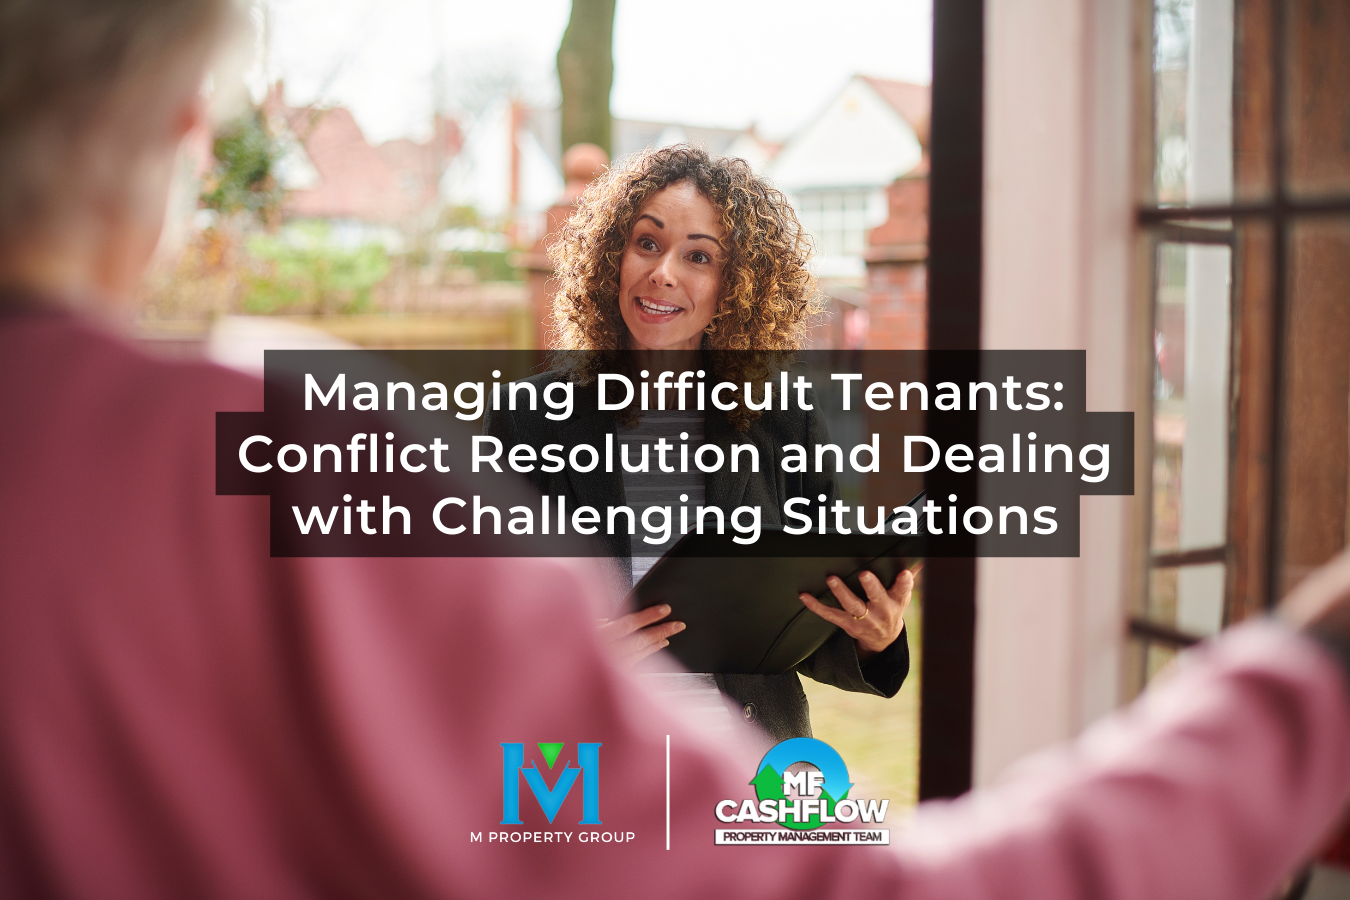 Managing Difficult Tenants: Conflict Resolution and Dealing with Challenging Situations